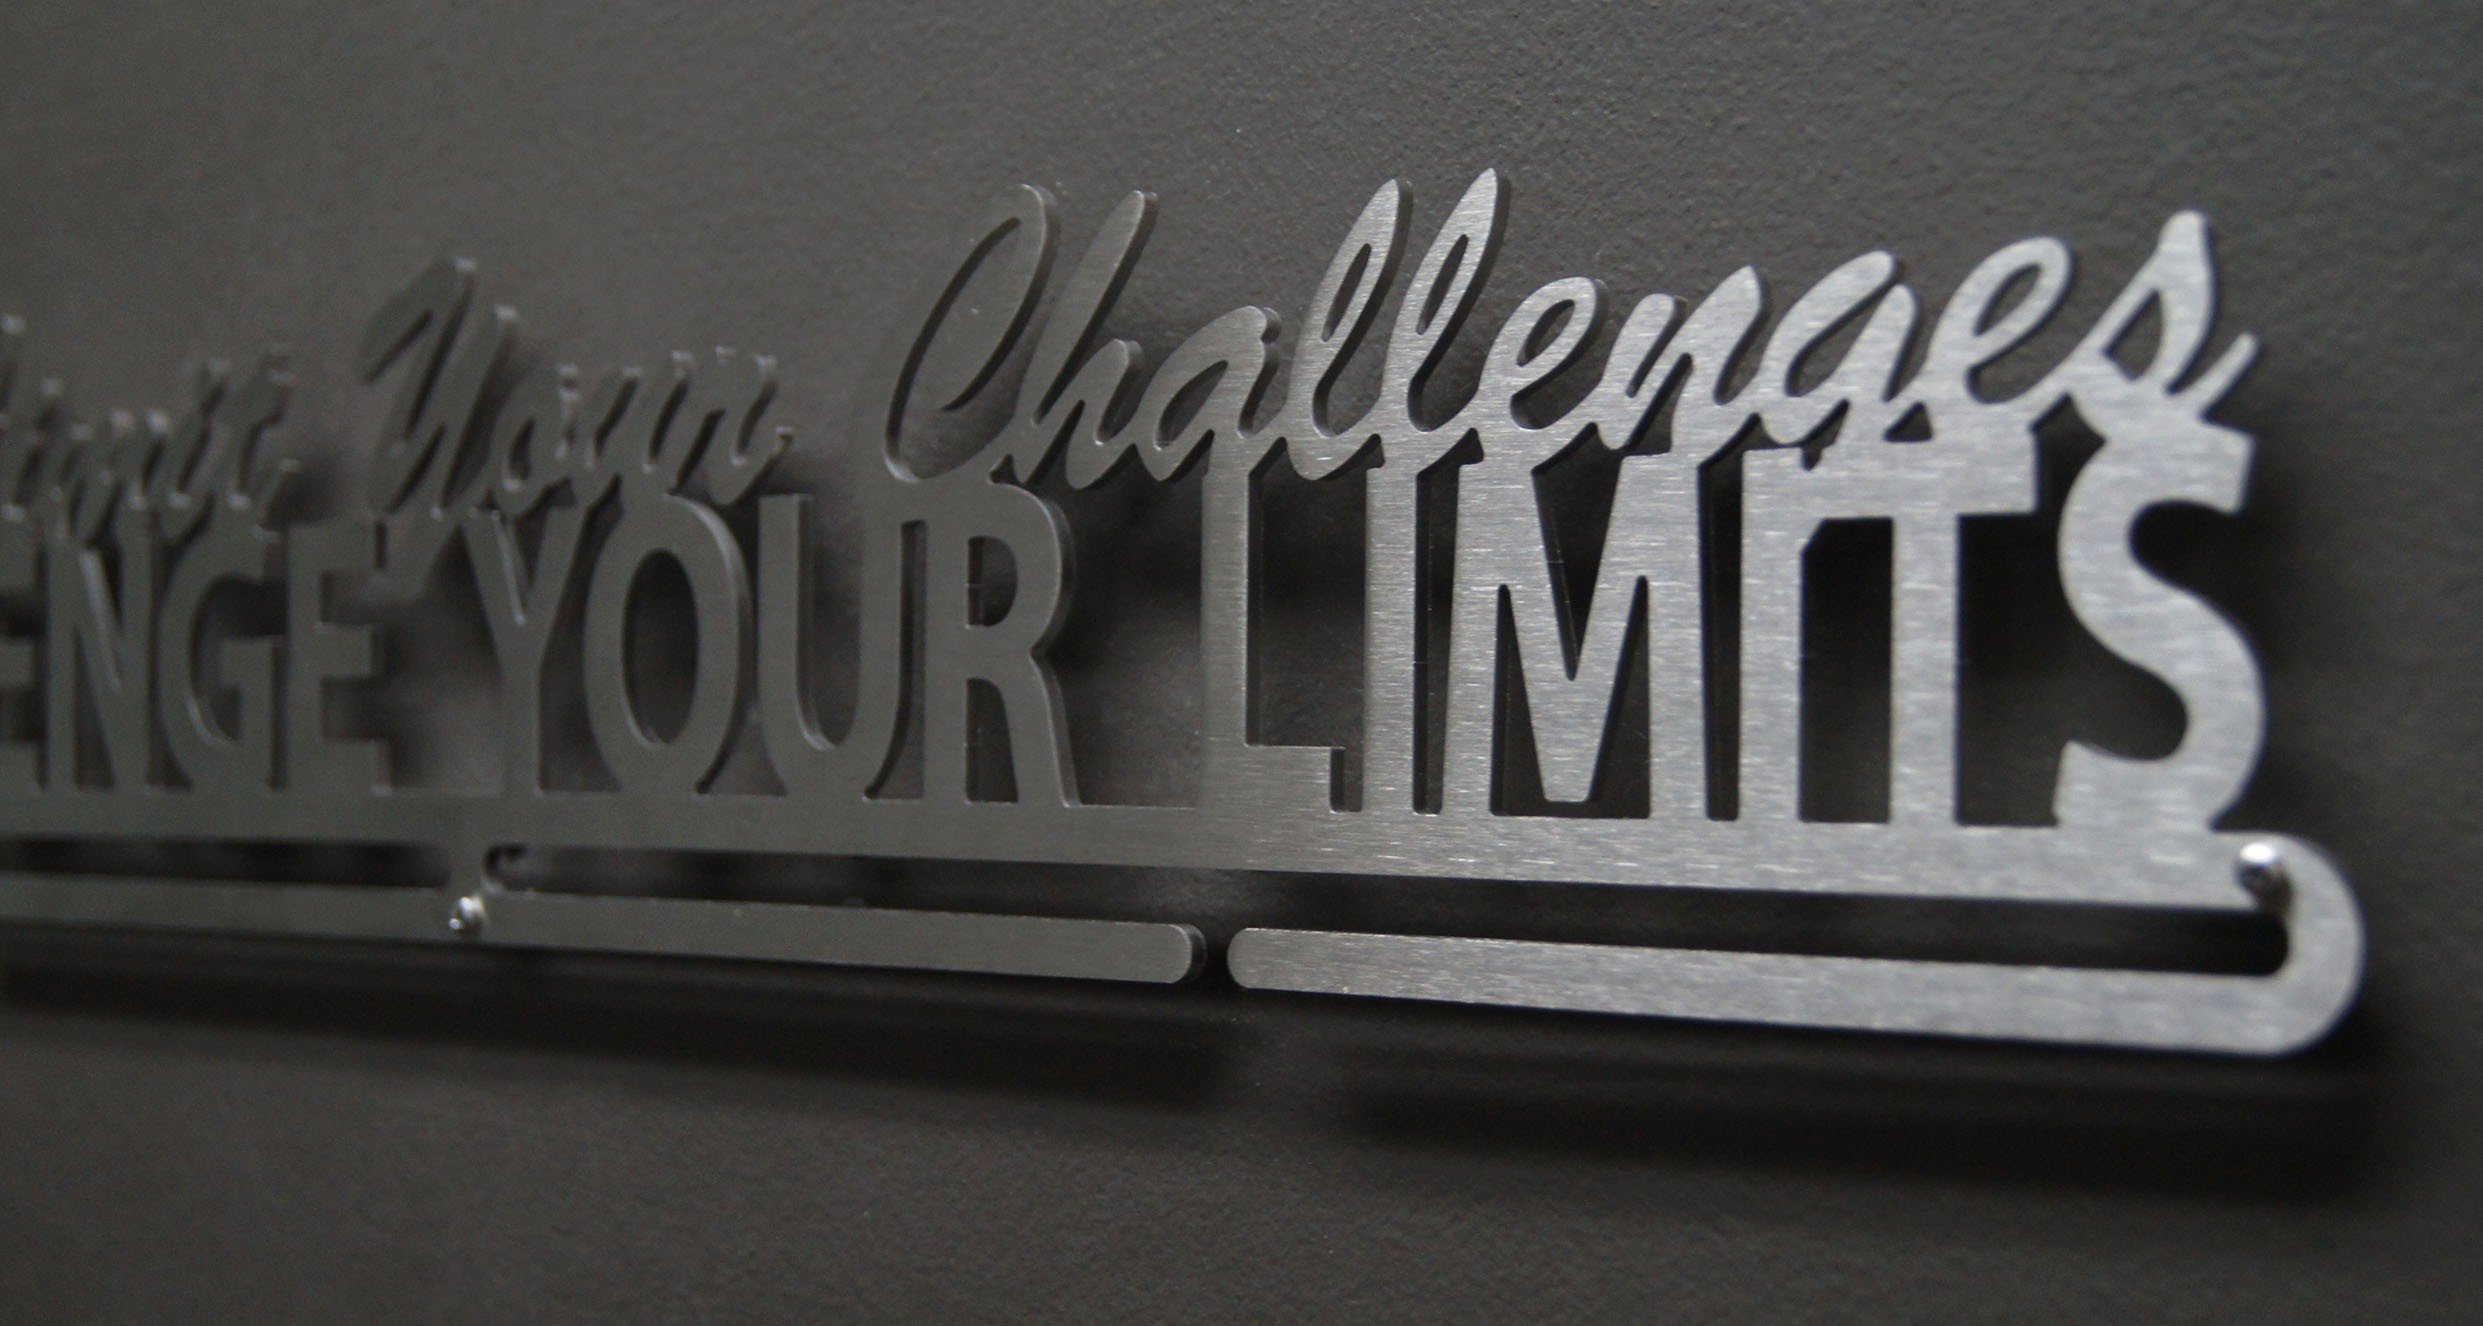 Challenge Your Limits 